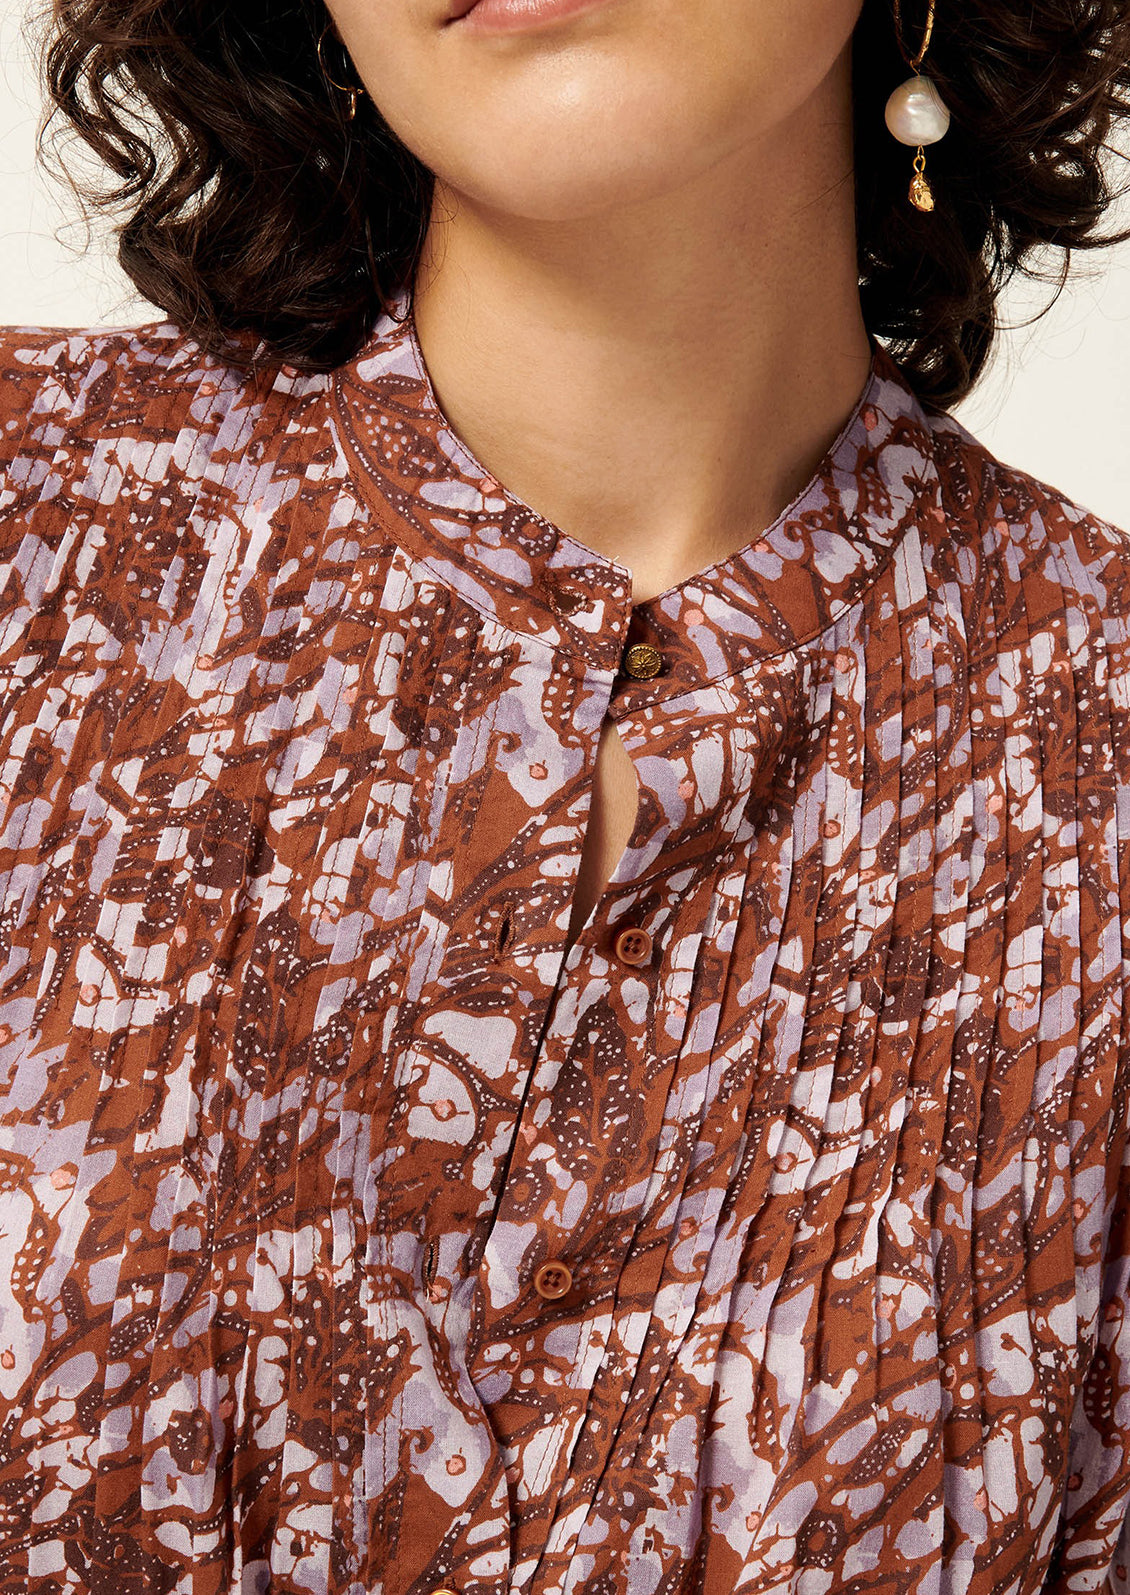 A woman wearing an abstract printed purple and rust colored button up top, showing pintucking and collar detail.